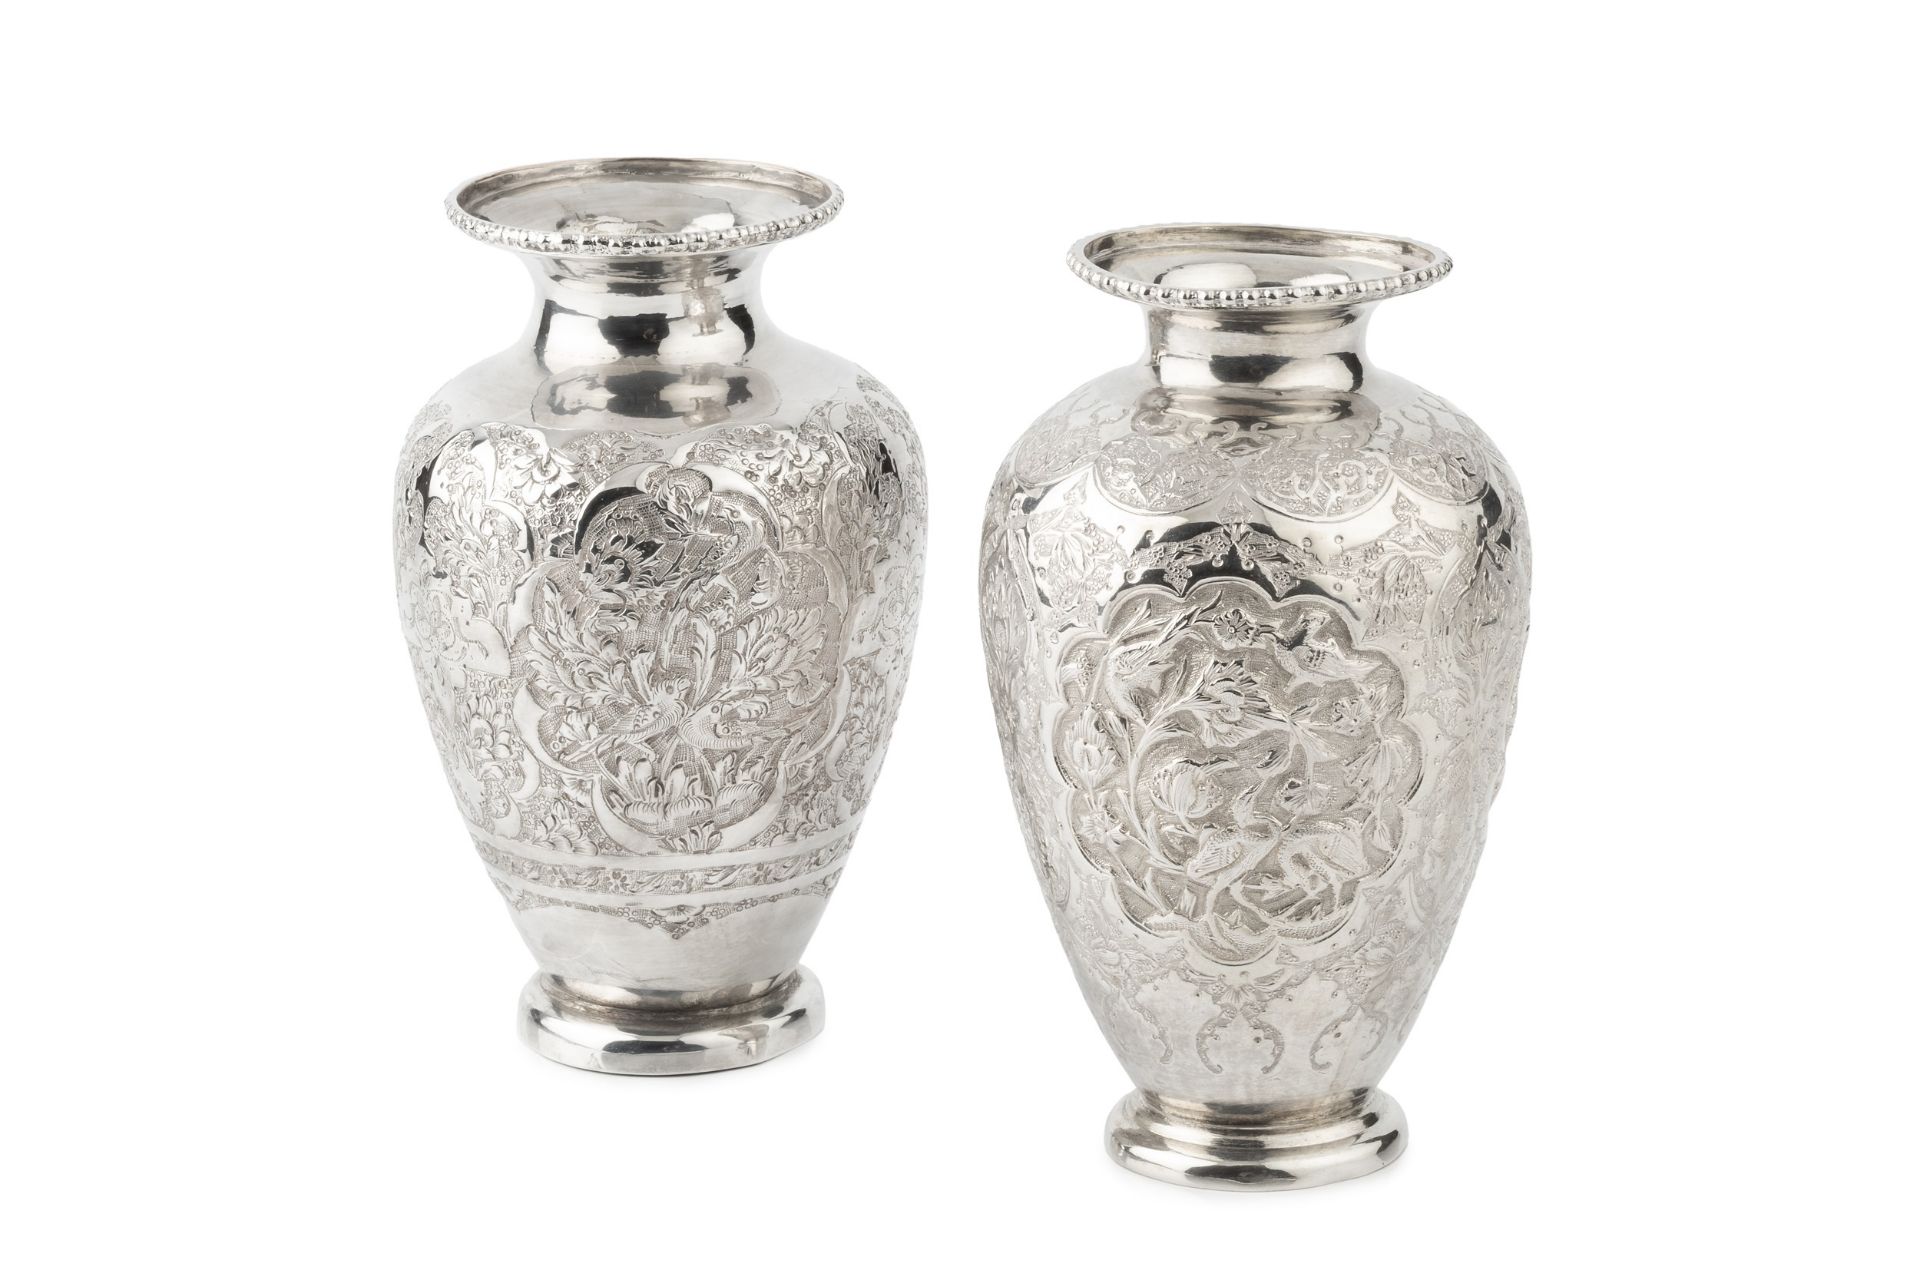 An Indian silver baluster vase, engraved and embossed with stylised flowering foliage within lobed